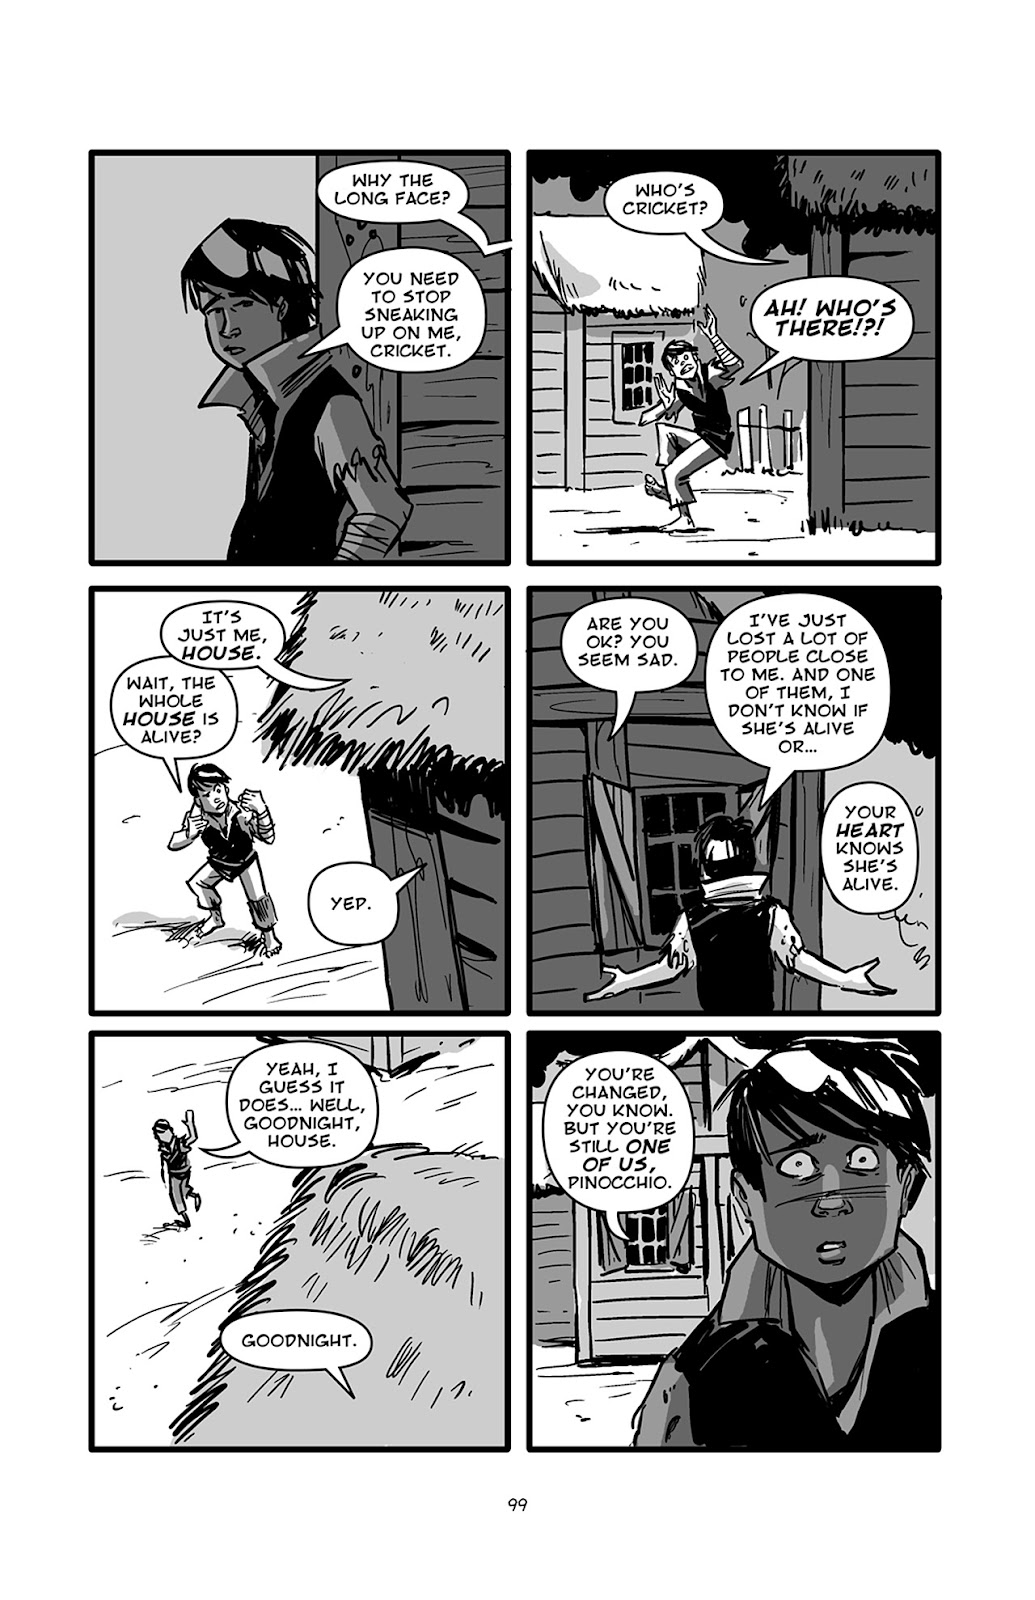 Pinocchio: Vampire Slayer - Of Wood and Blood issue 4 - Page 26